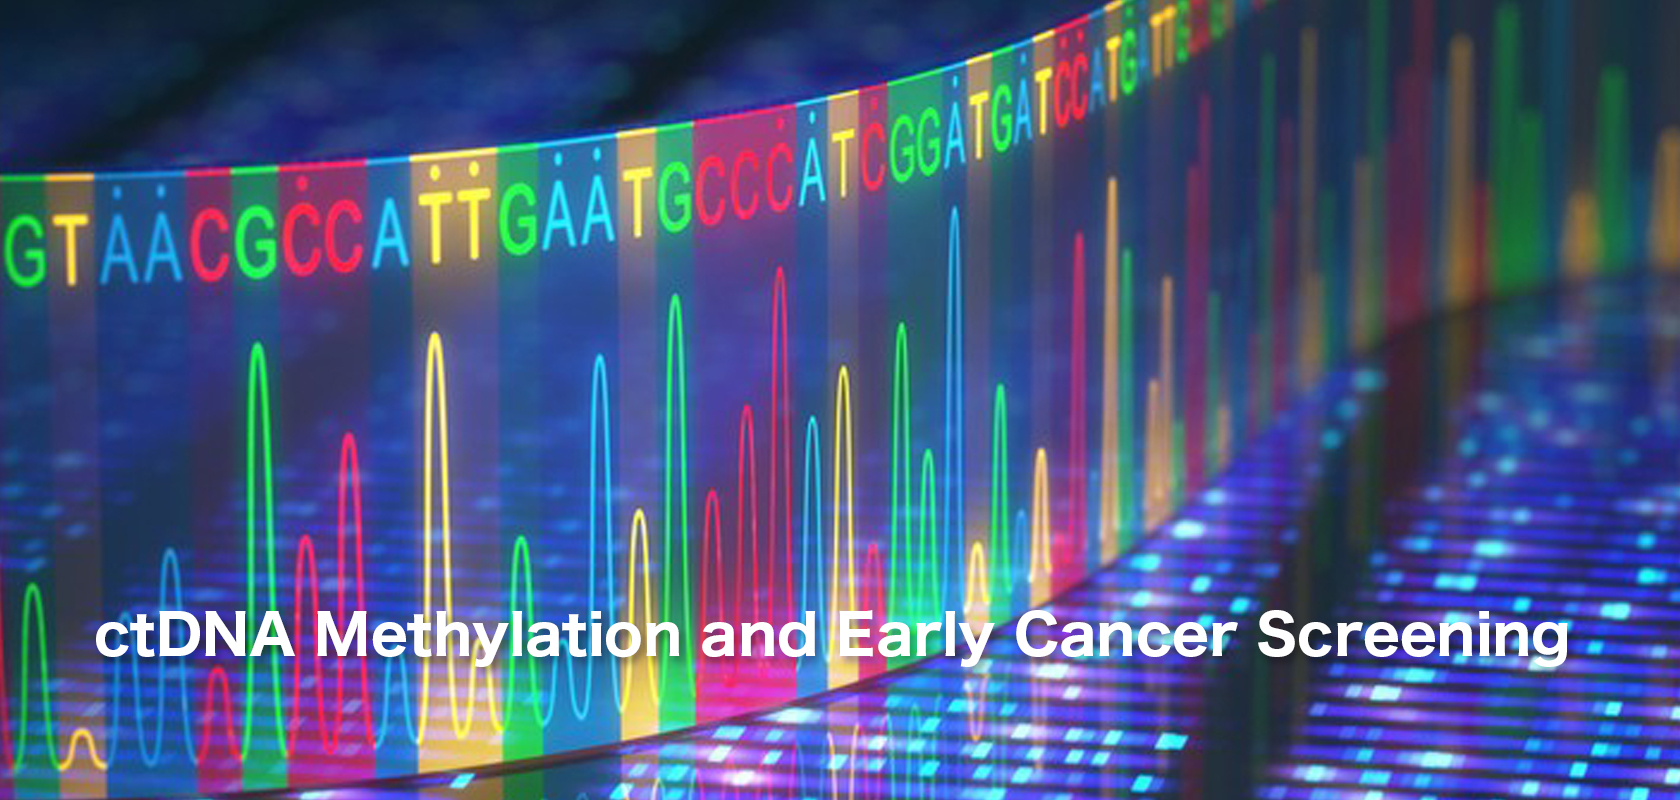 ctDNA Methylation and Early Cancer Screening